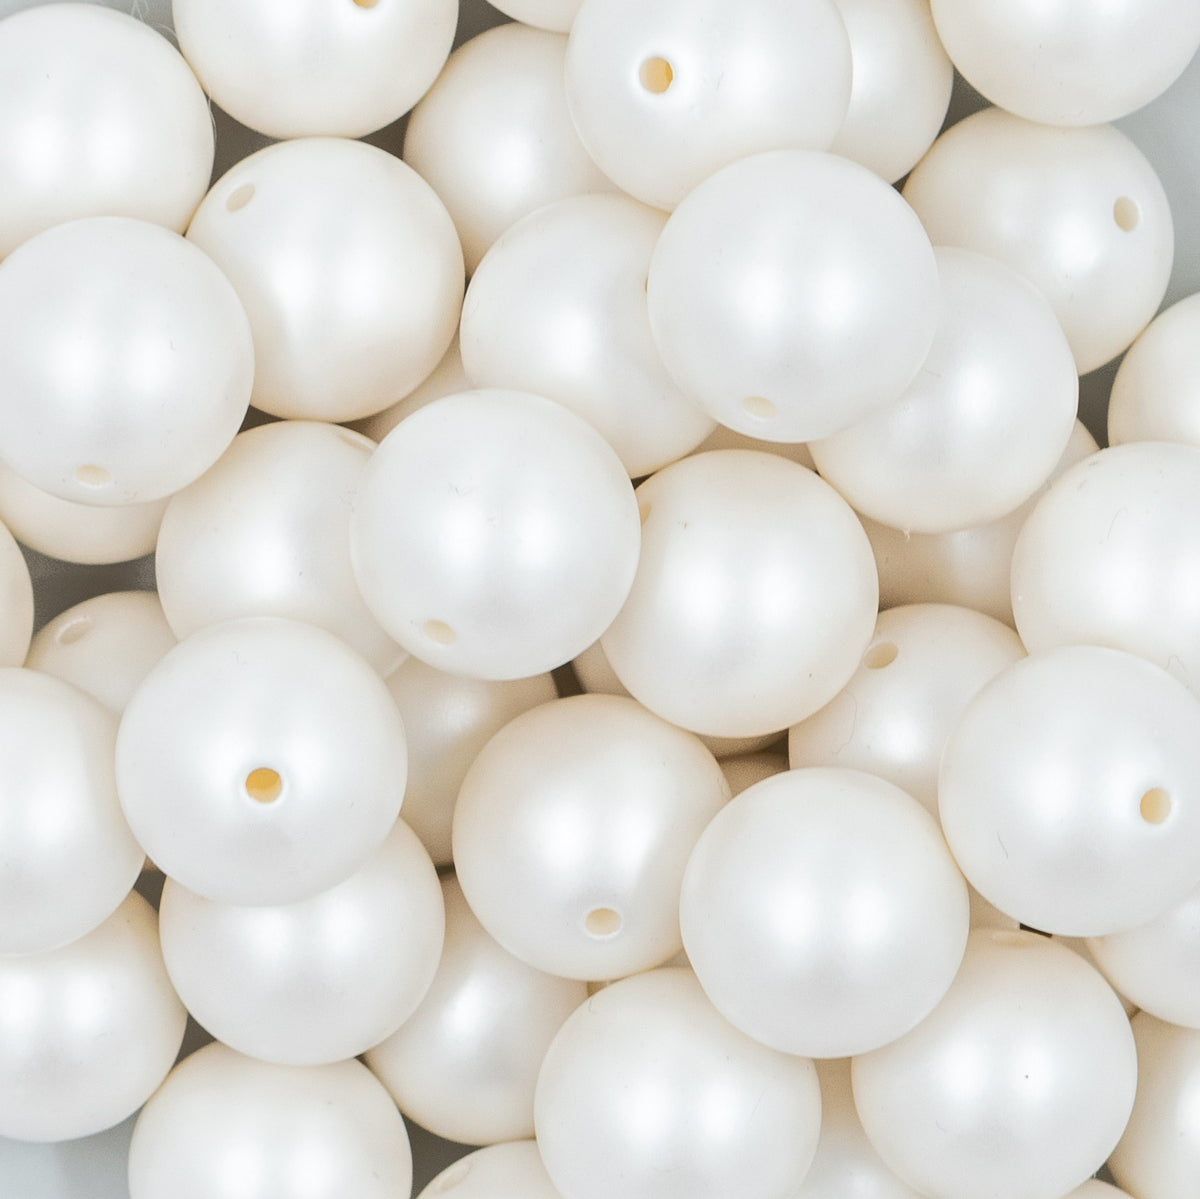 20mm White Matte Pearl Solid Acrylic Bubblegum Beads